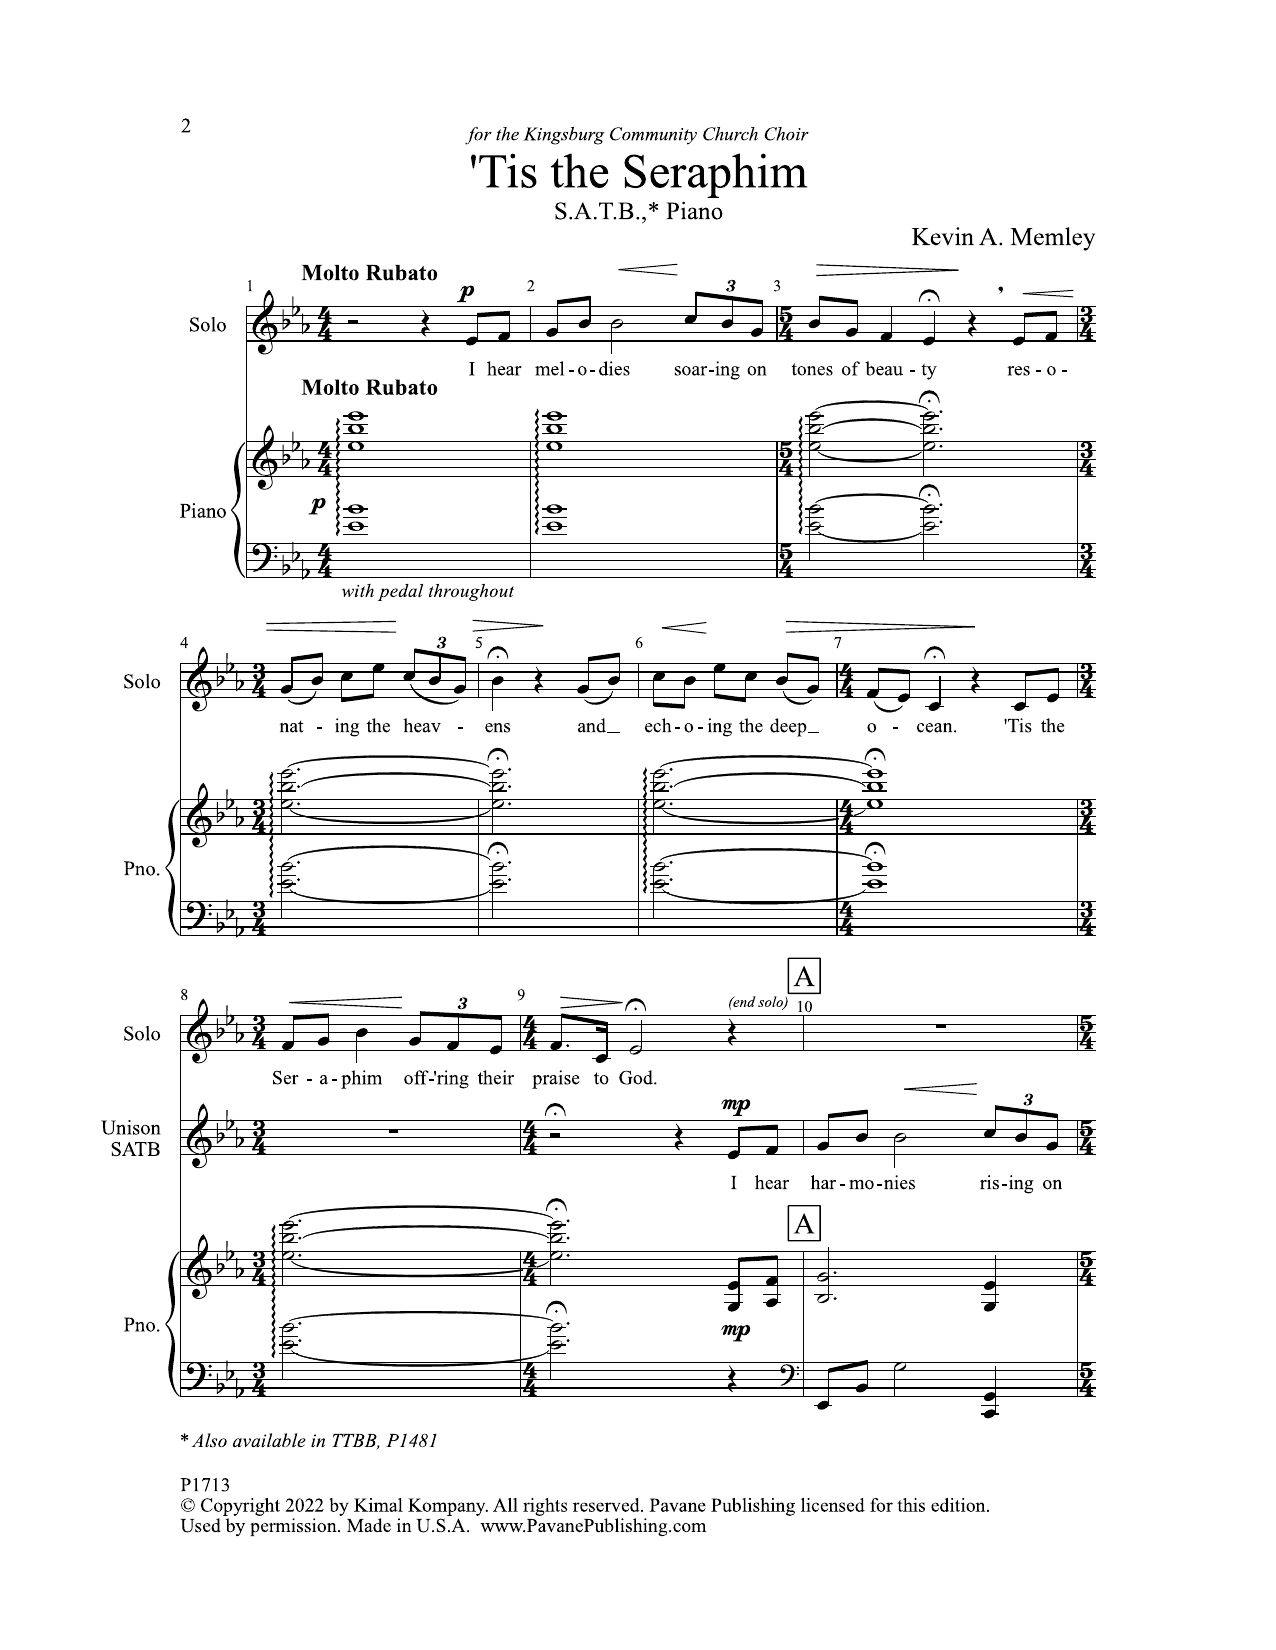 Download Kevin A. Memley 'Tis the Seraphim Sheet Music